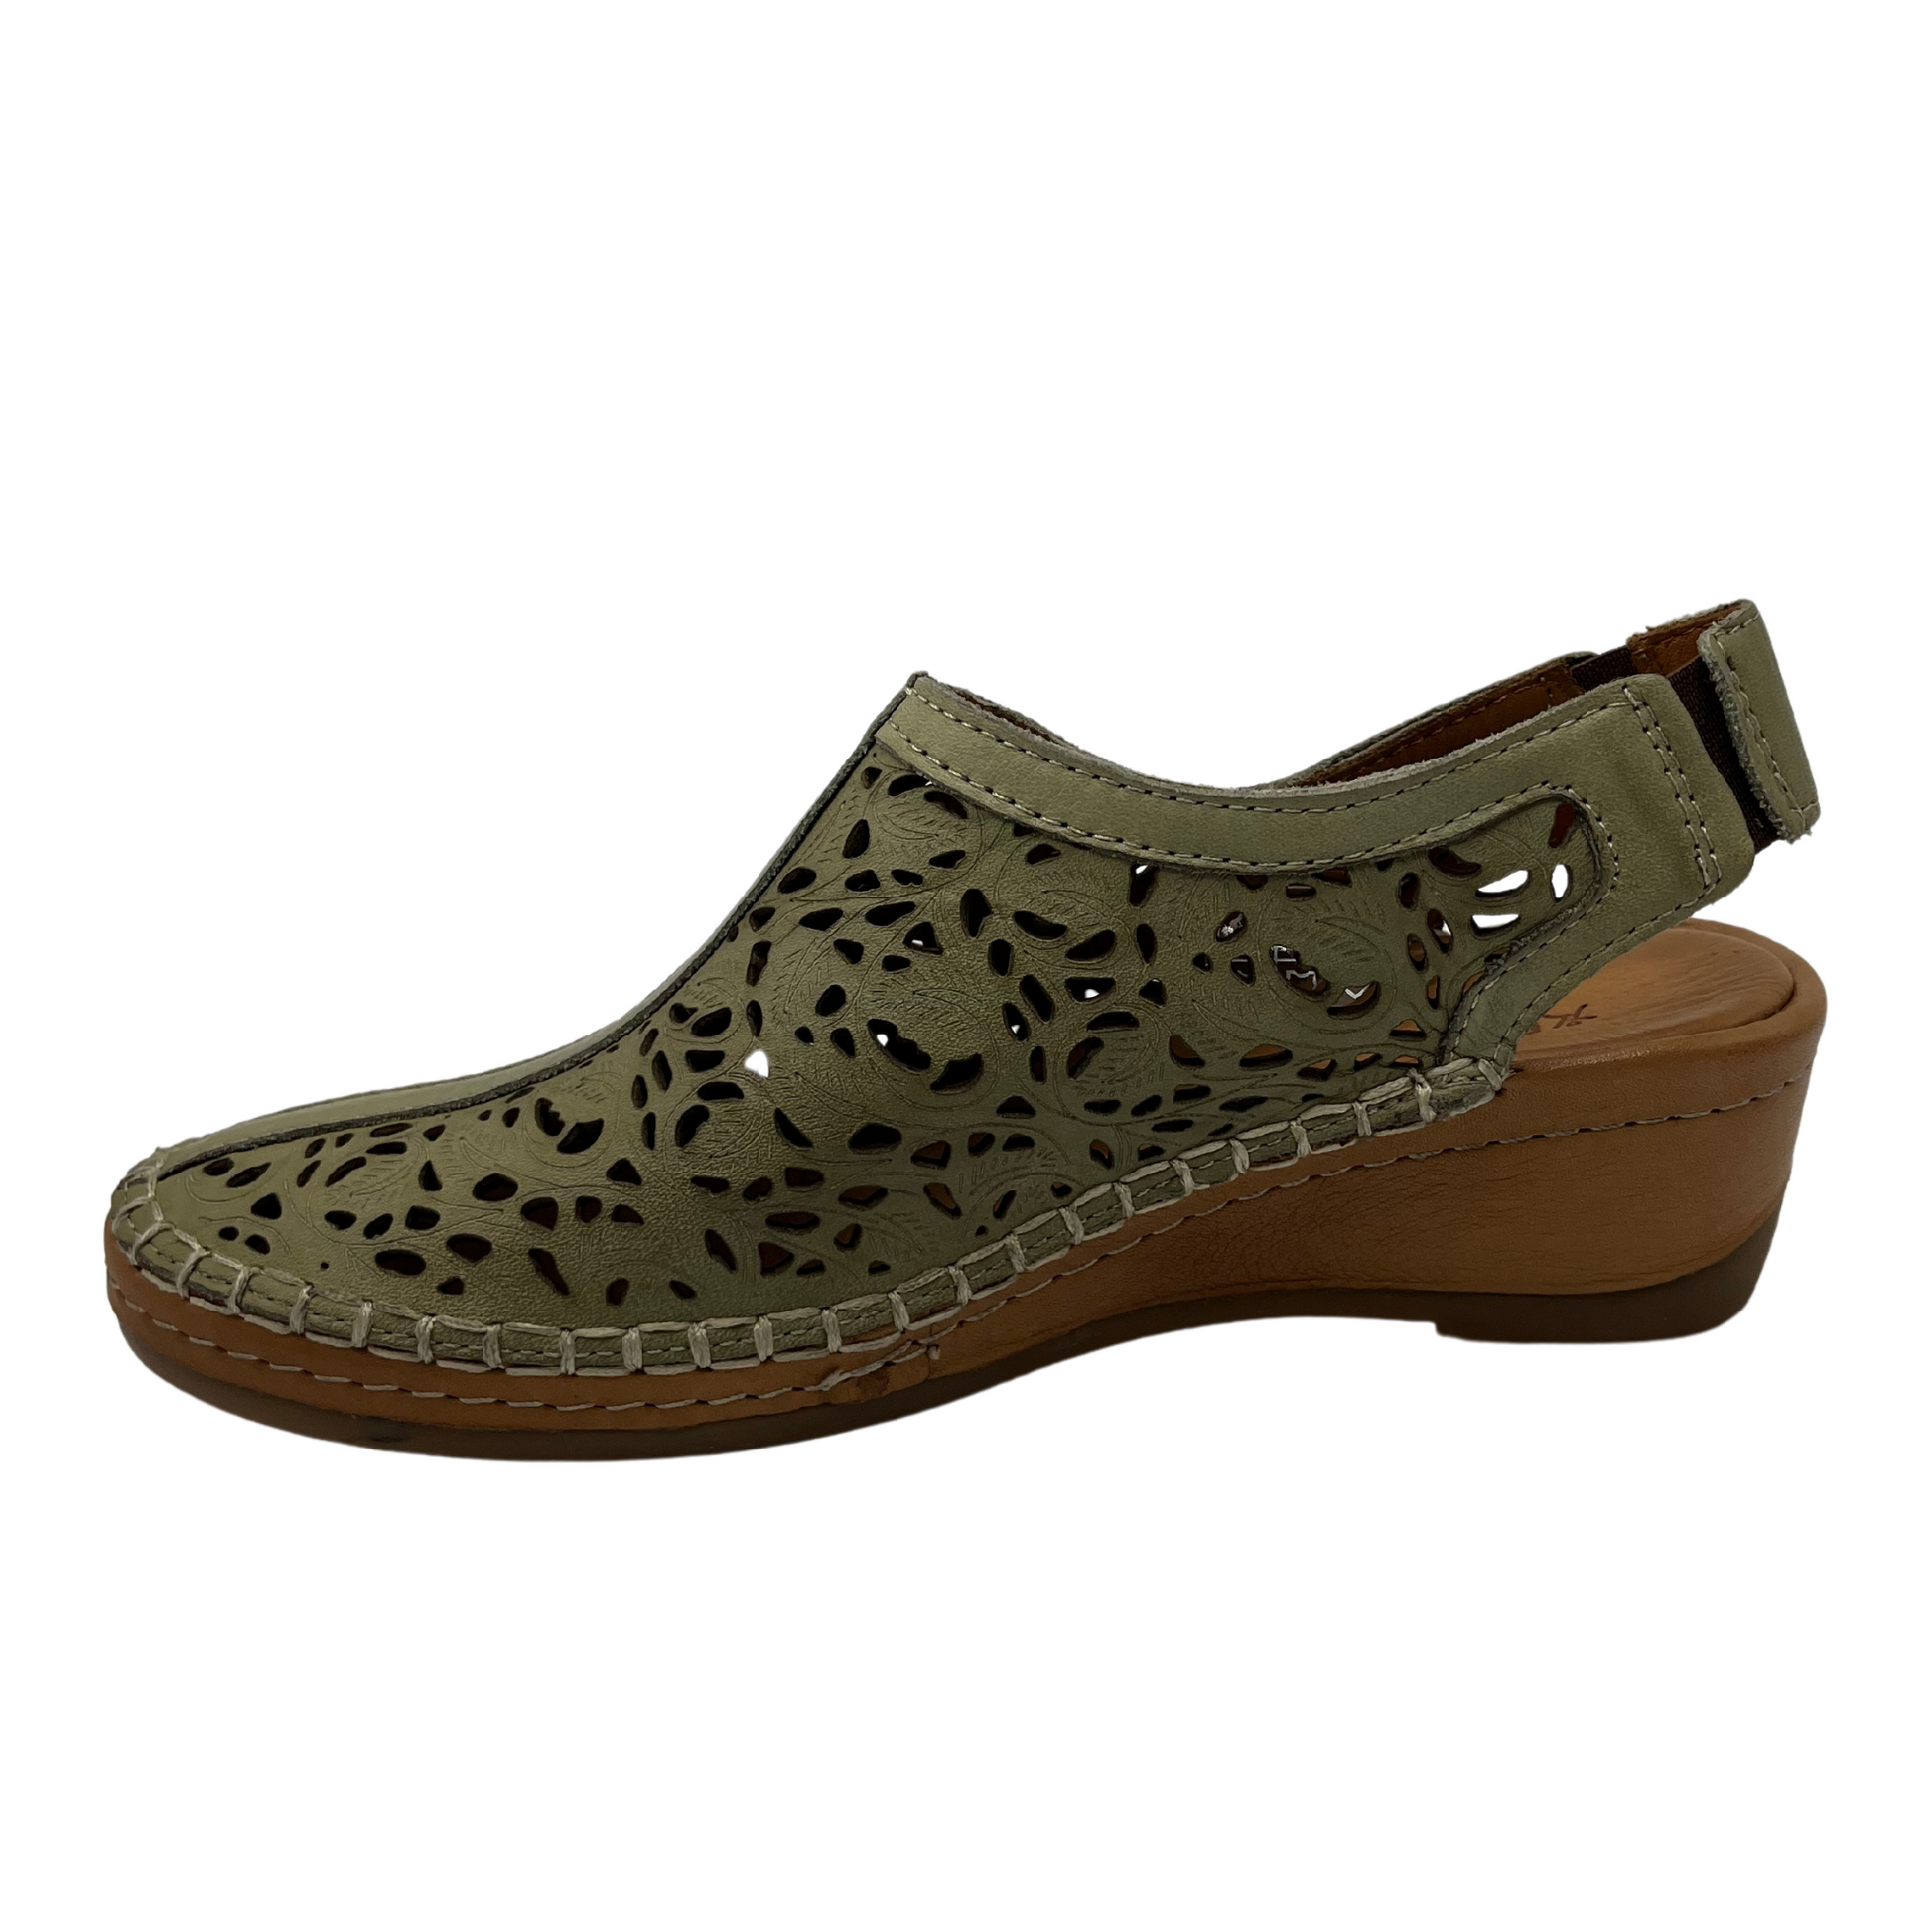 Left facing view of light green leather shoe with cut out design with low wedge heel